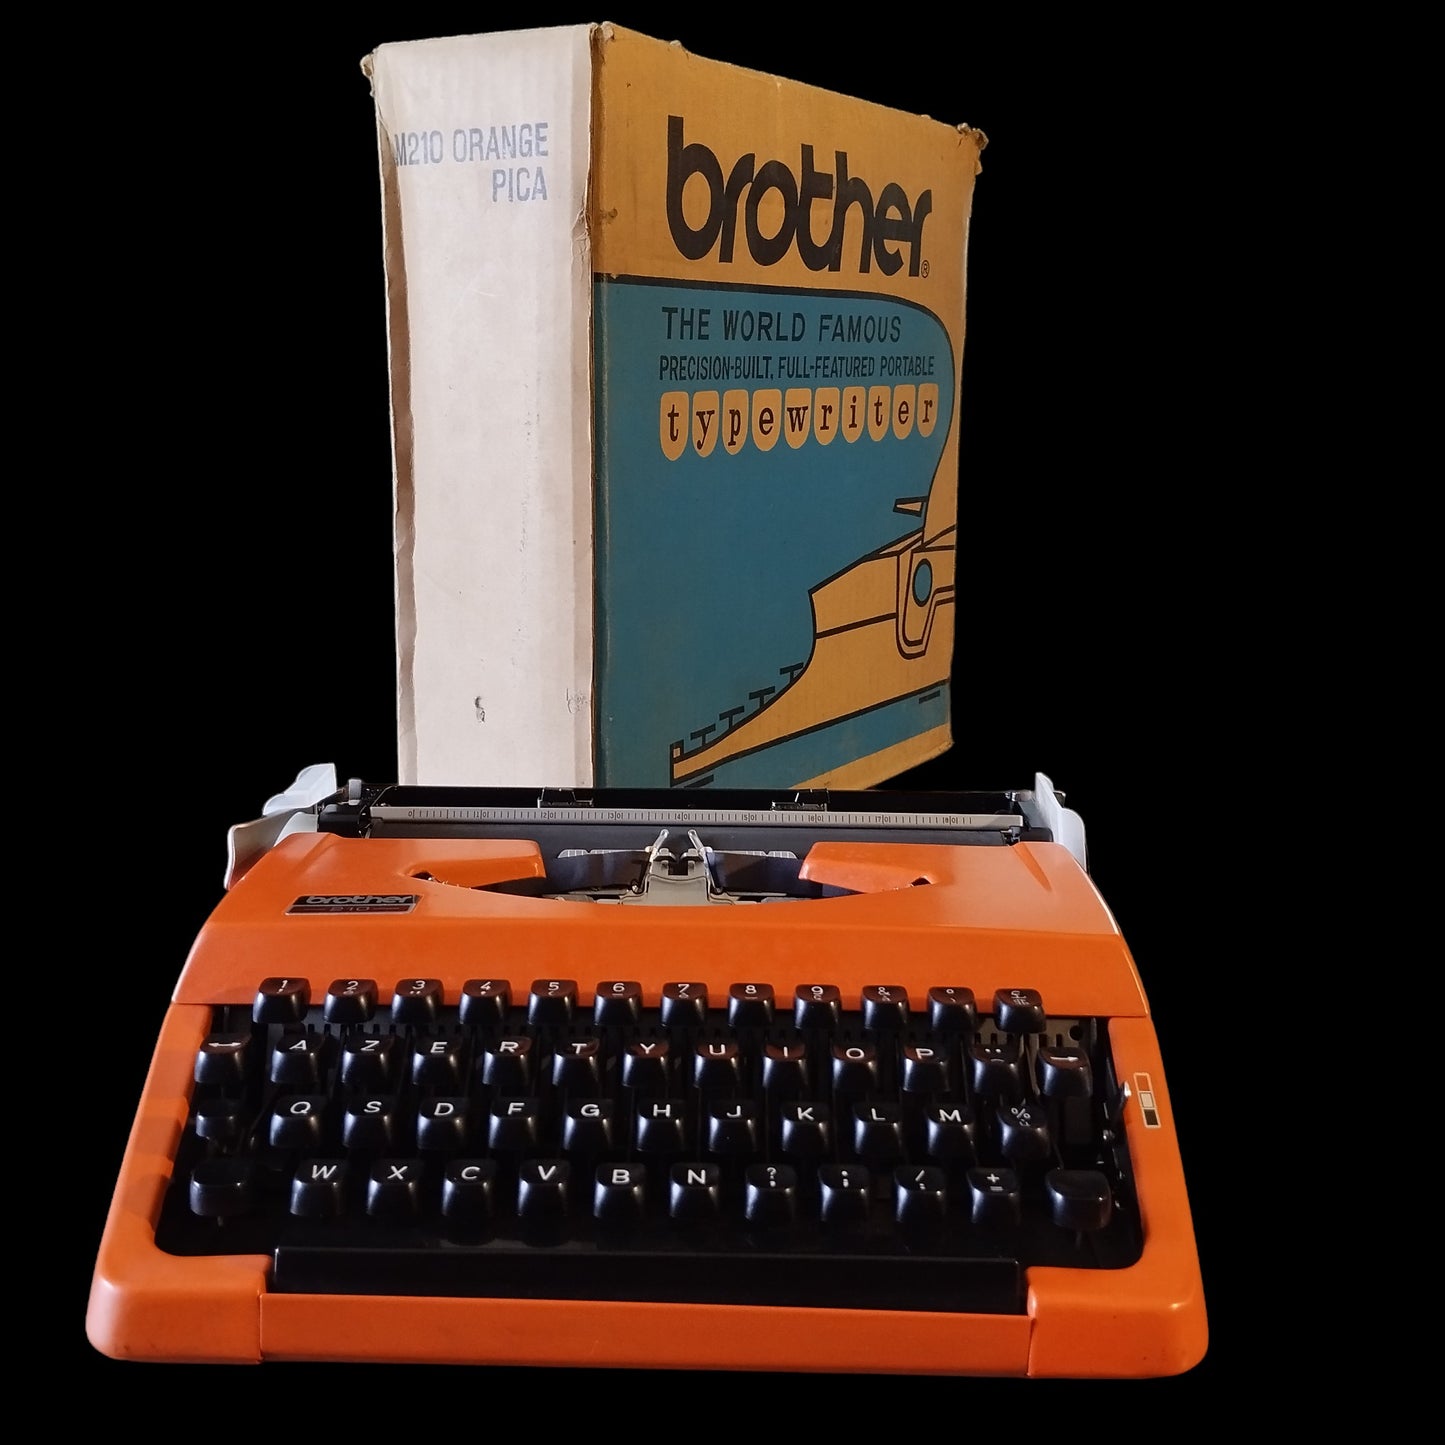 Image of Brother 810 AZERTY Keyboard Typewriter. Available from universaltypewritercompany.in